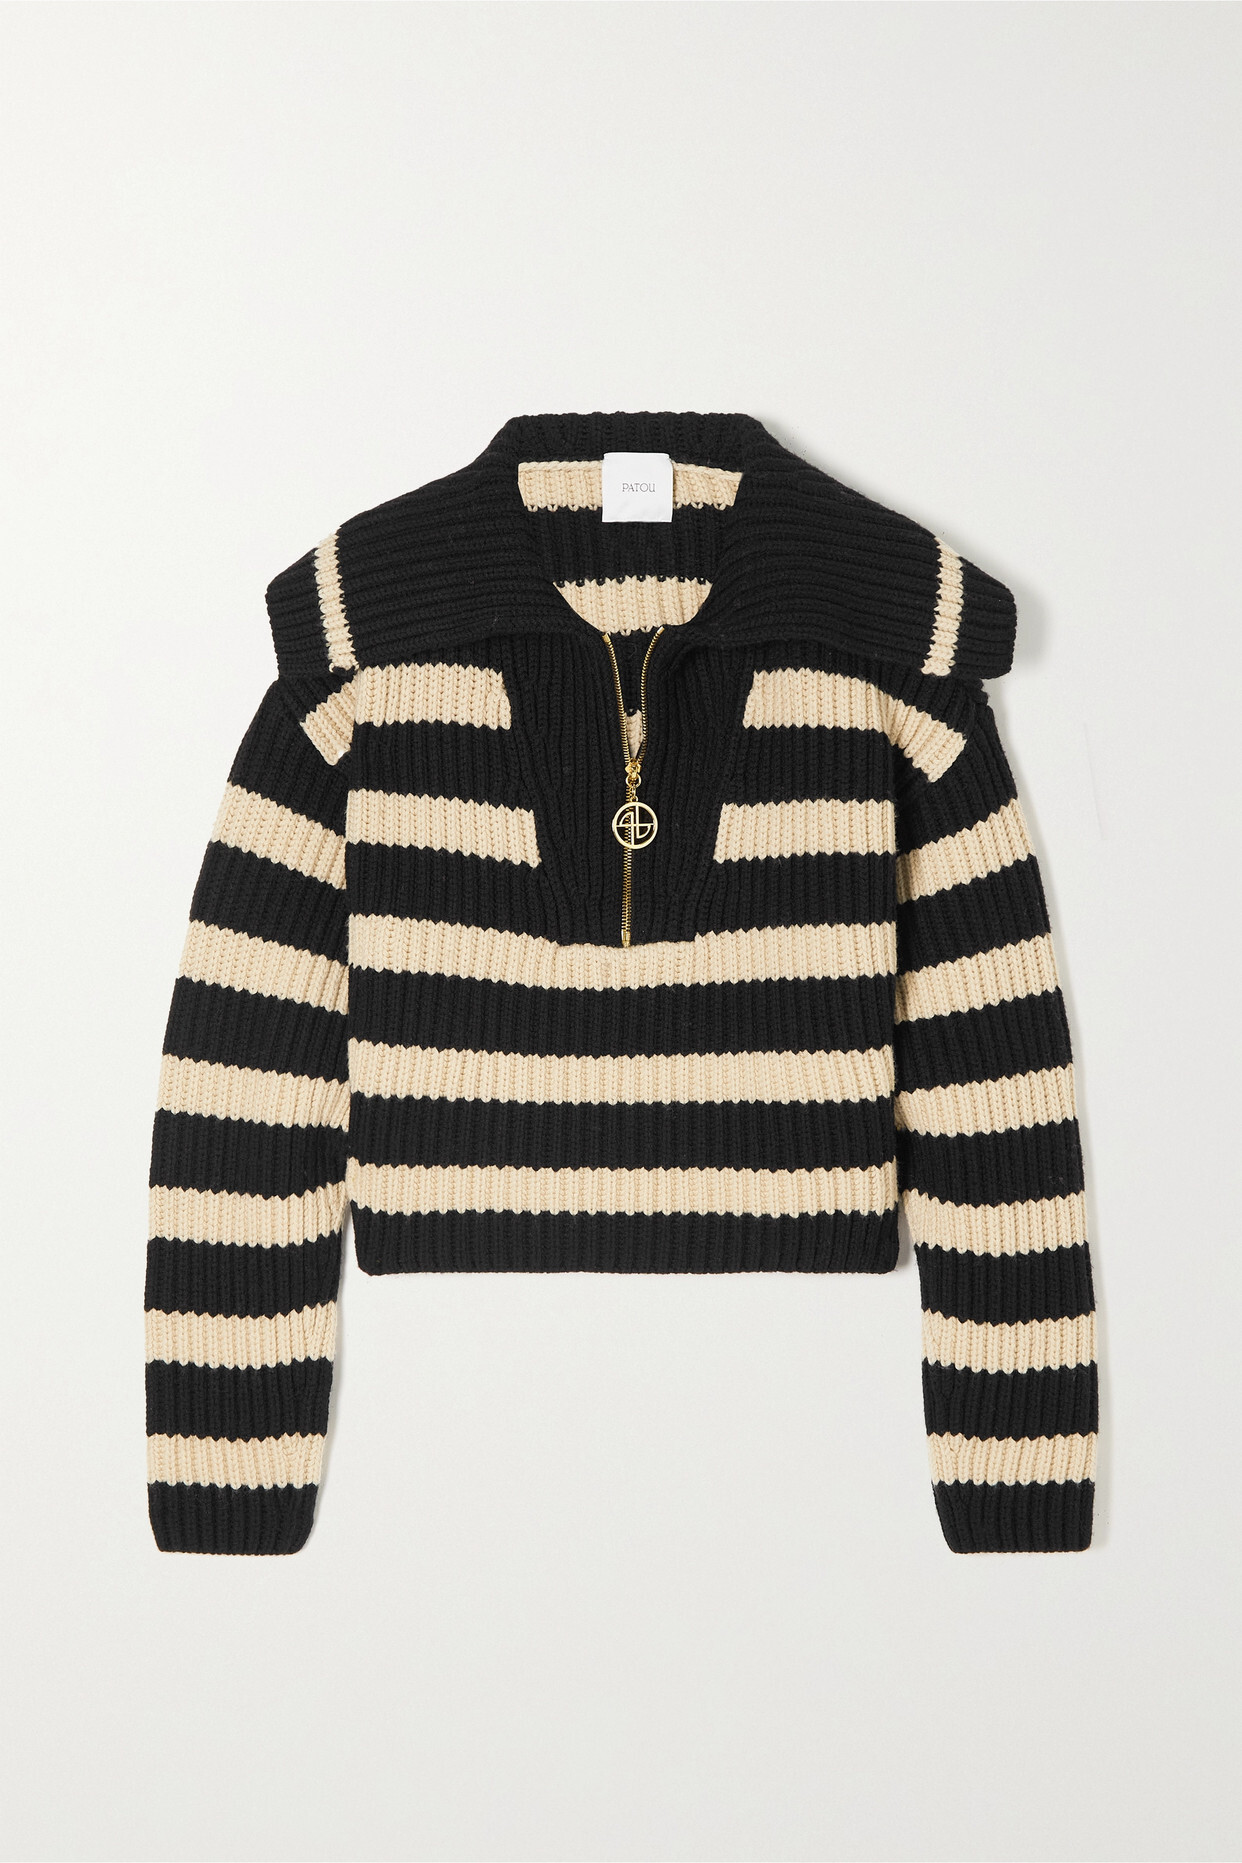 Patou - Striped Organic Cotton And Recycled Wool-blend Half-zip Sweater - Black